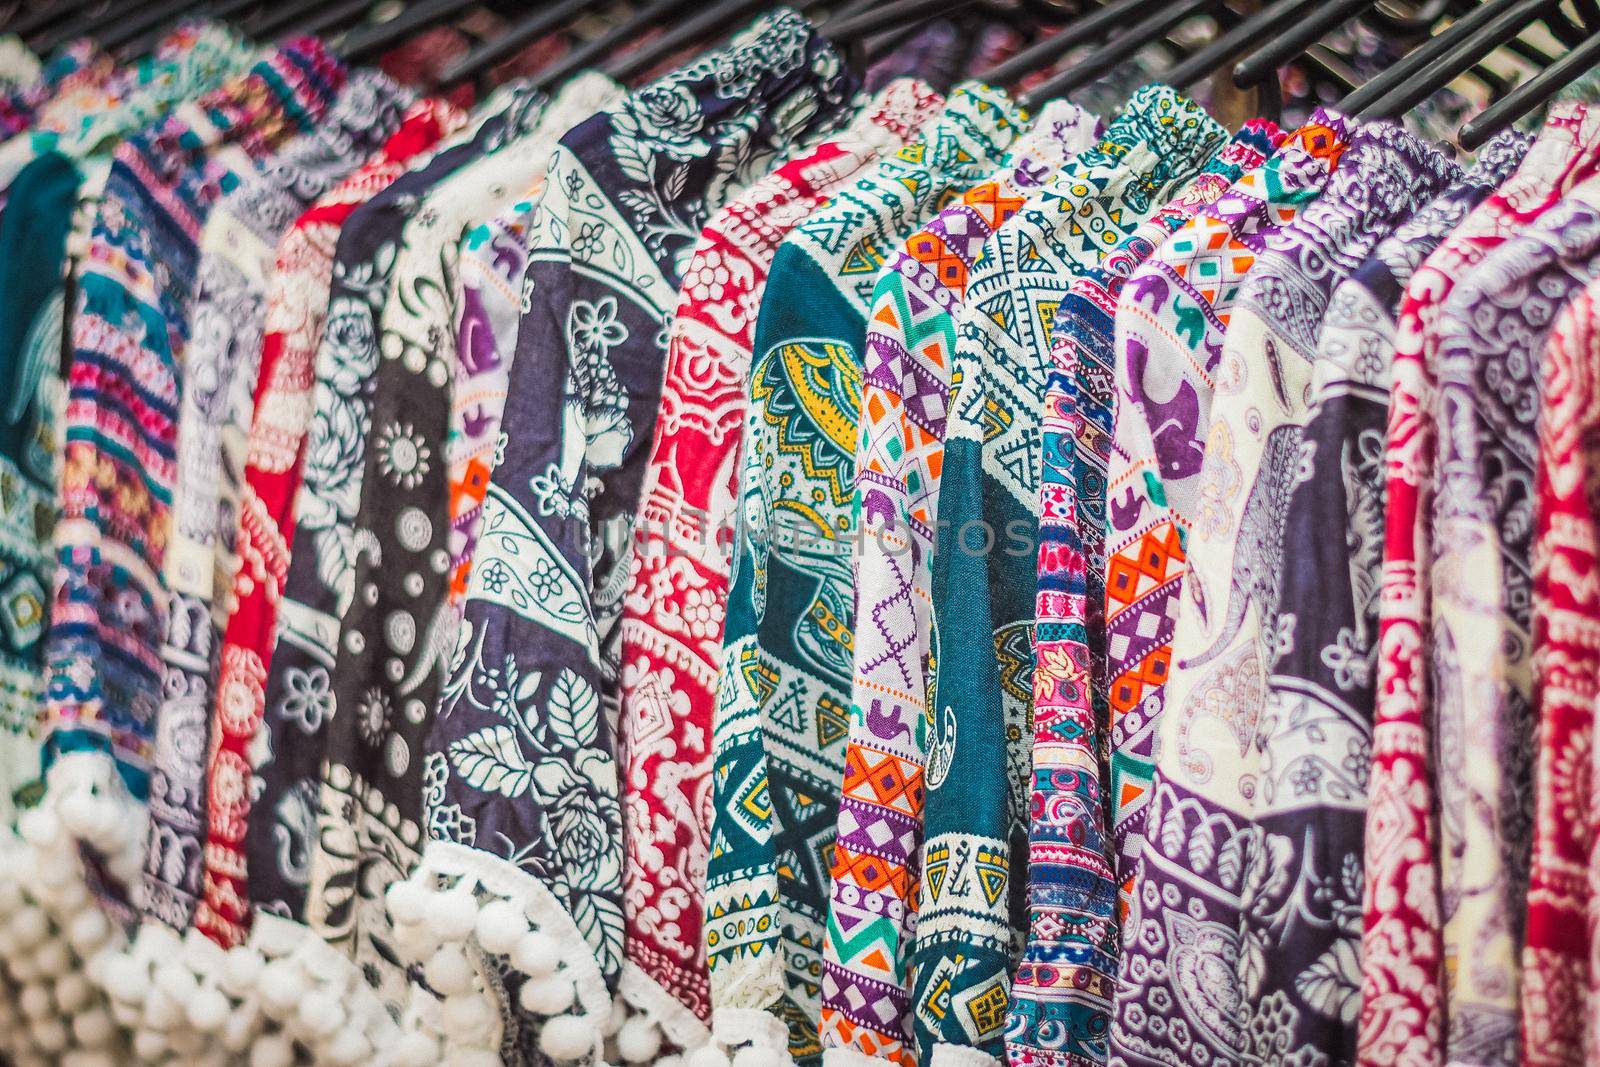 clothes hanging on a rack in a flea market Souvenir shop in Thailand by Petrichor